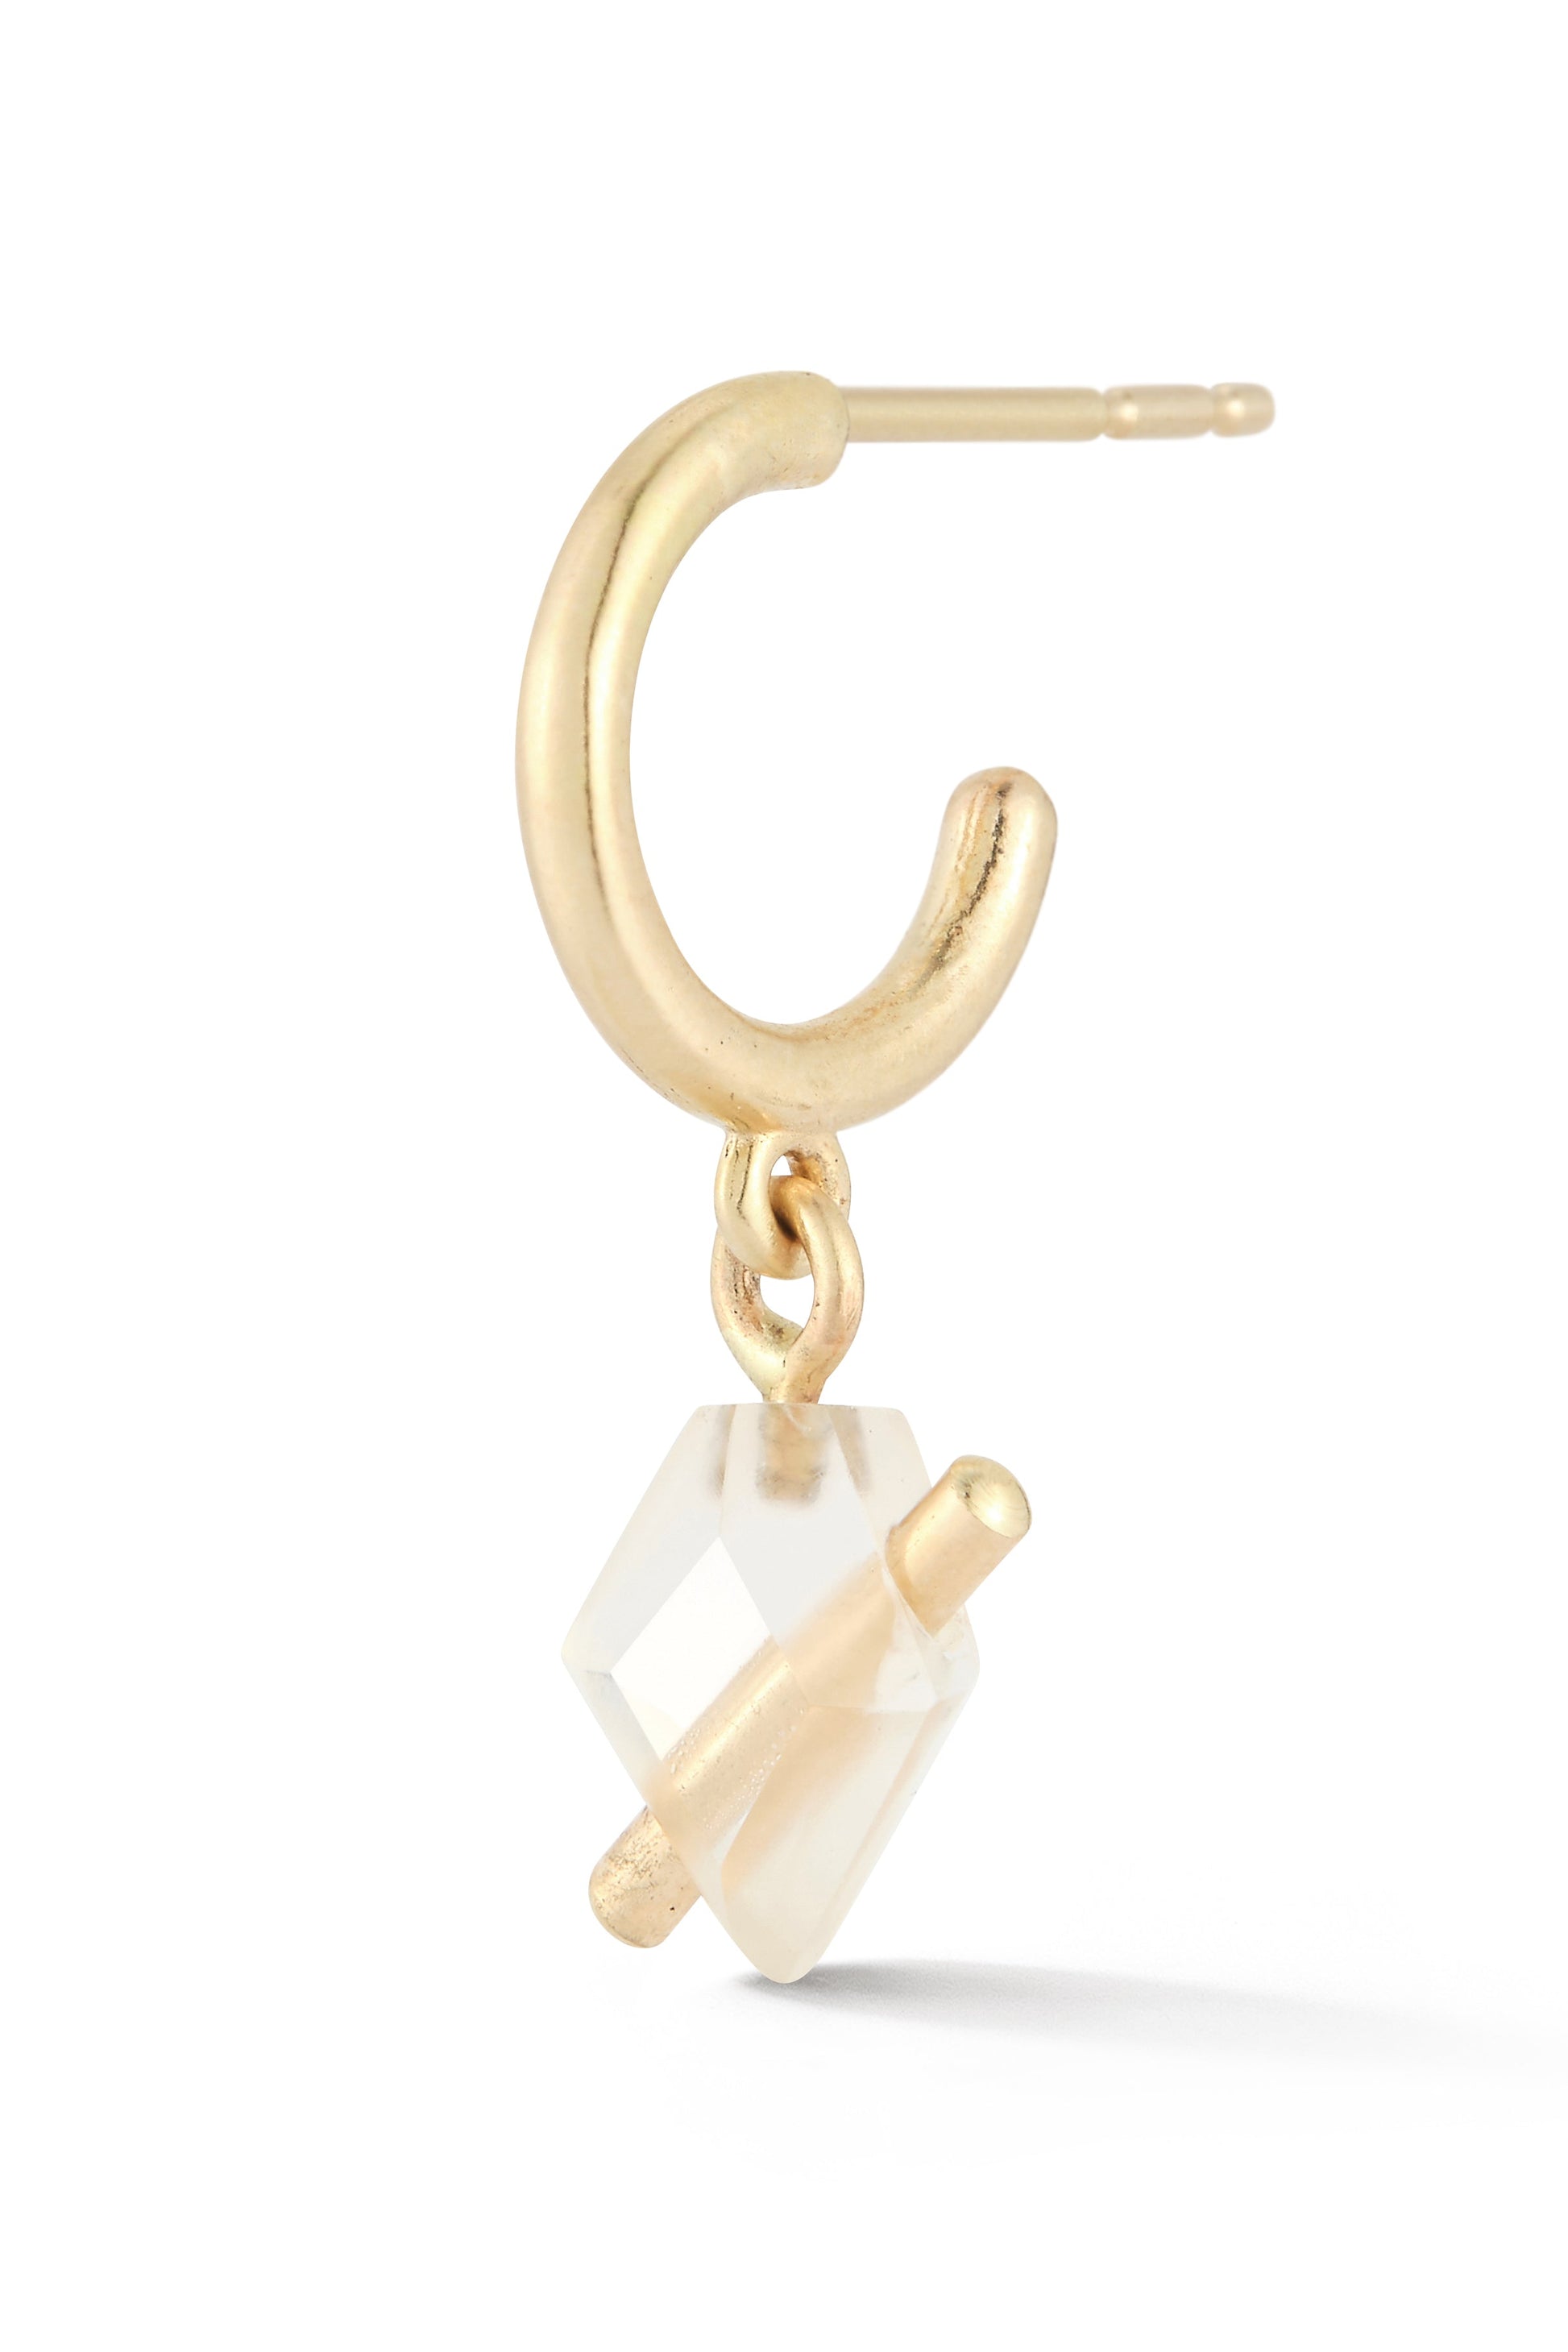 OLIVIA SHIH-Lucid Asymmetrical Mini Hoops-RECYCLED GOLD (WHEN POSSIBLE)